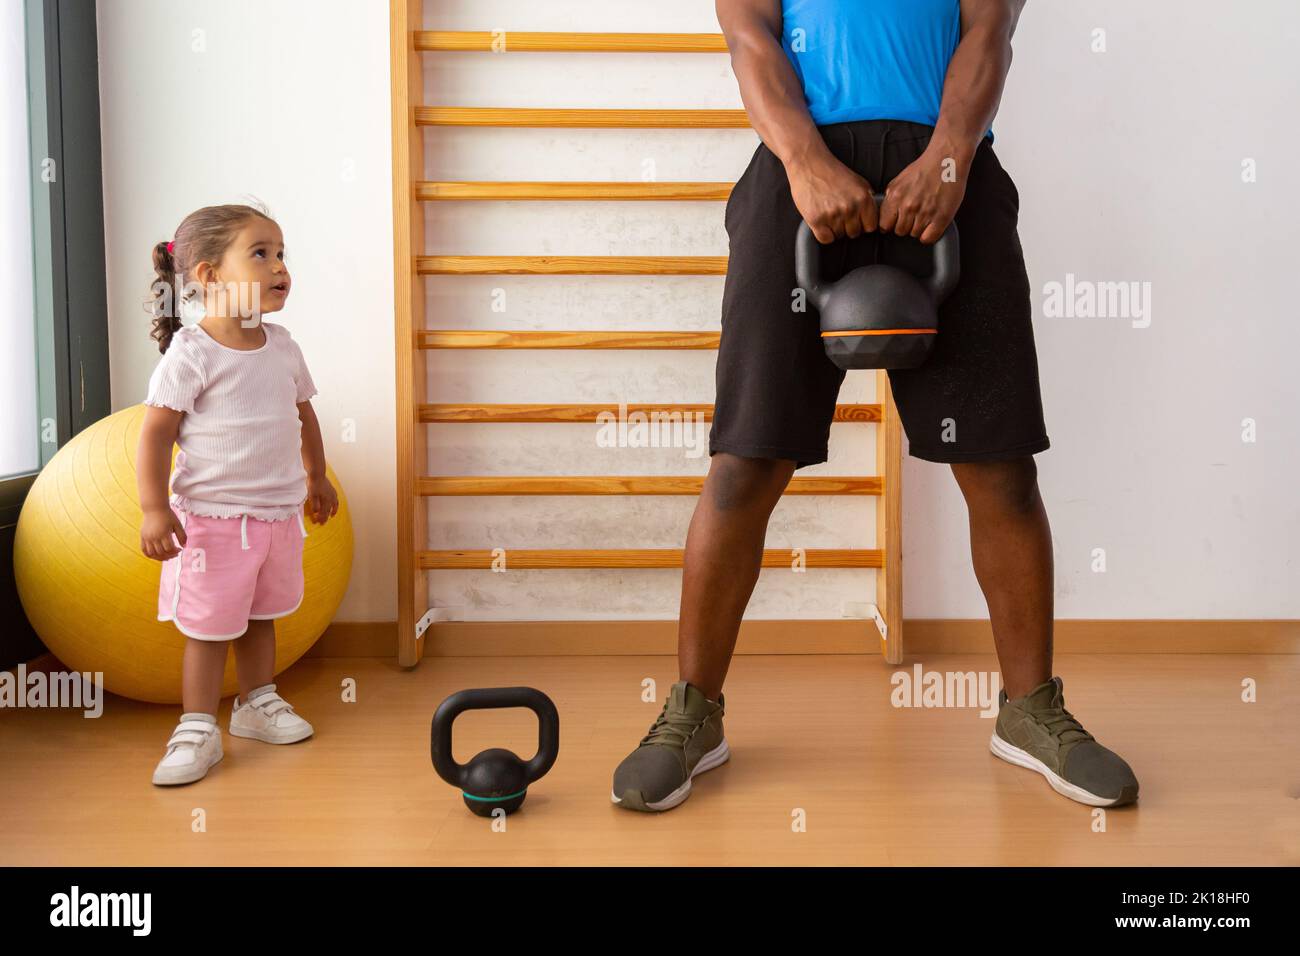 Father lifting kettlebell with his daughter Stock Photo